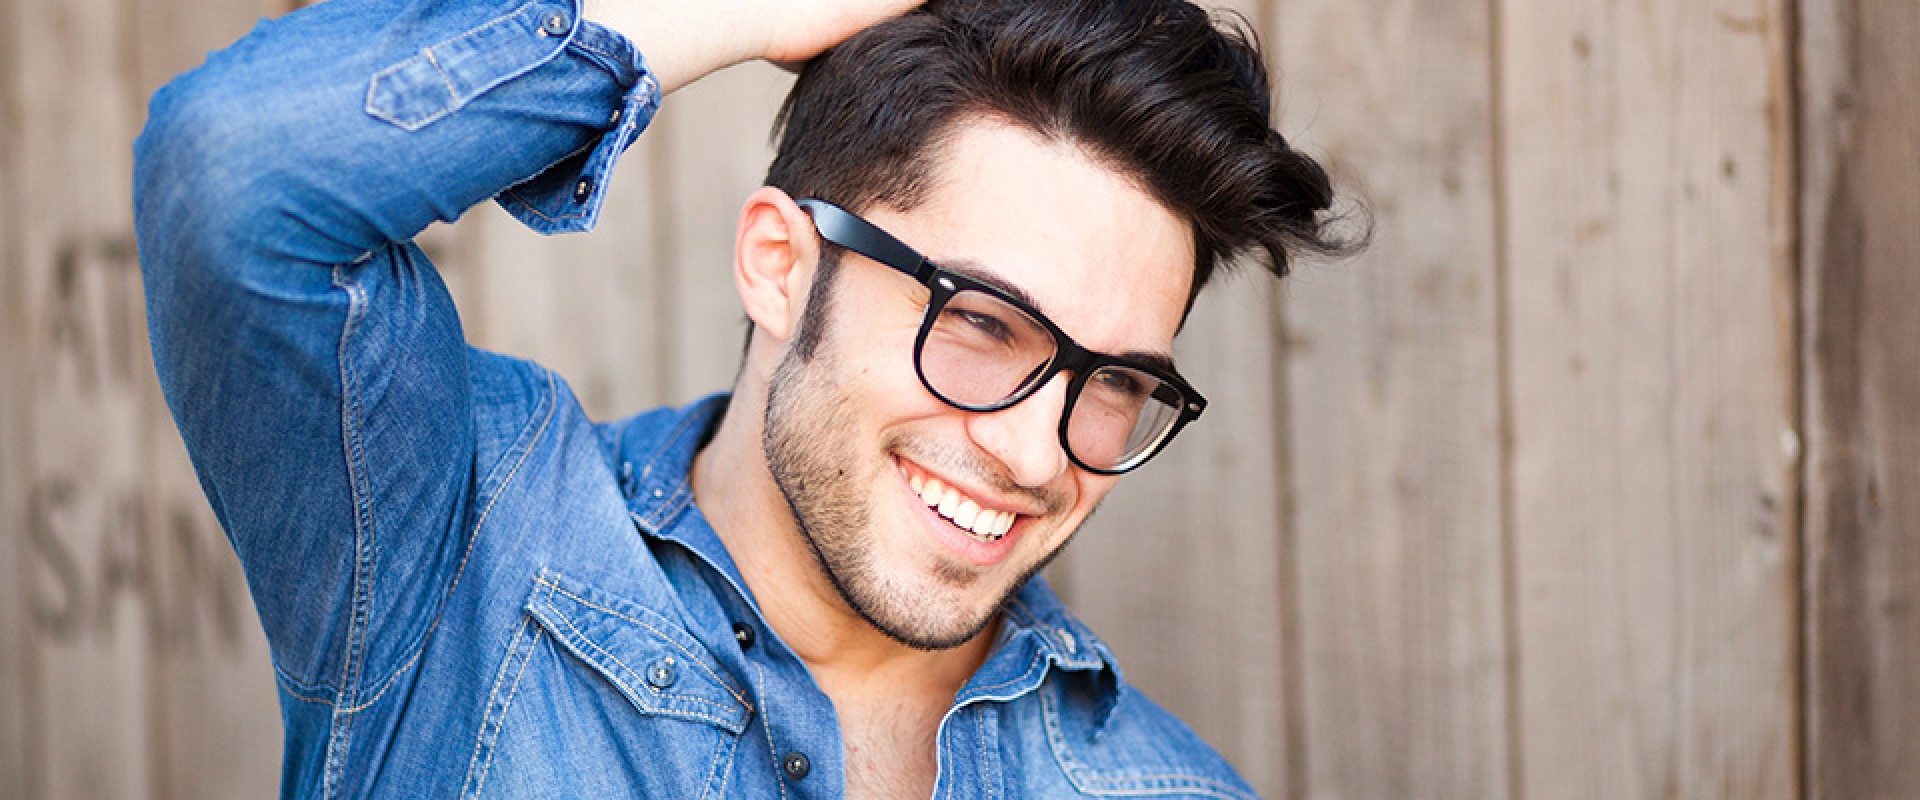 Men&amp;#039;s Hair Restoration Systems: Here&amp;#039;s What You Need to Know